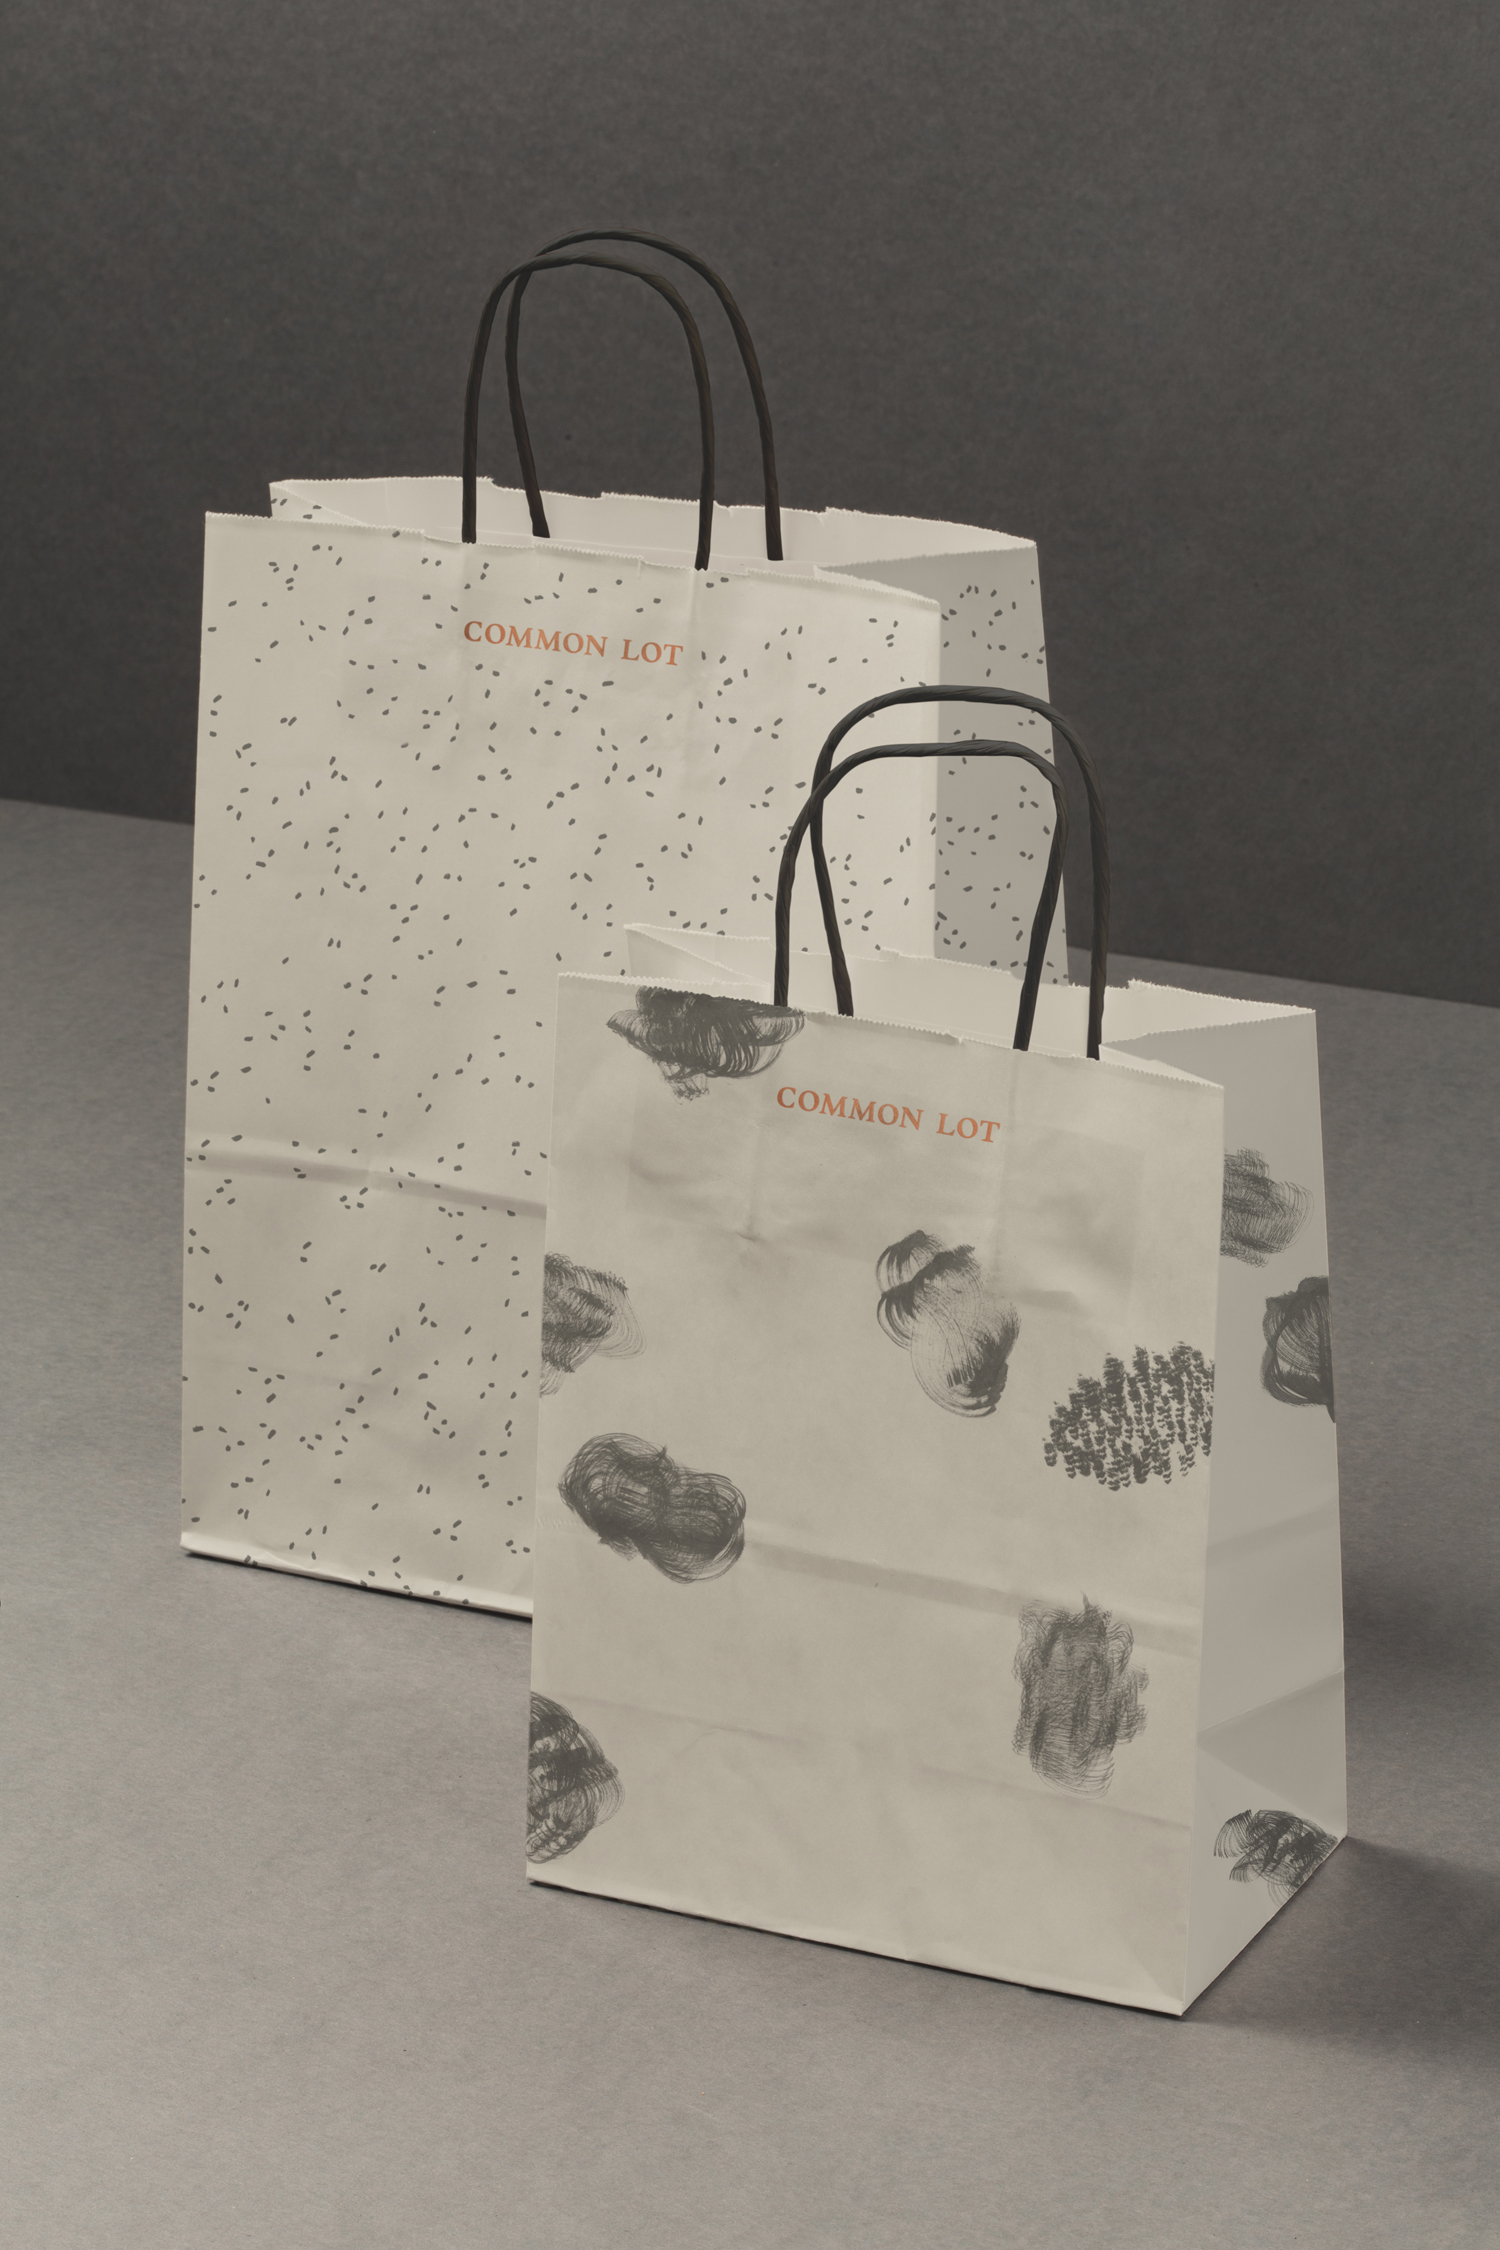 Brand identity and bags by Perky Bros for Millburn, NJ, restaurant Common Lot